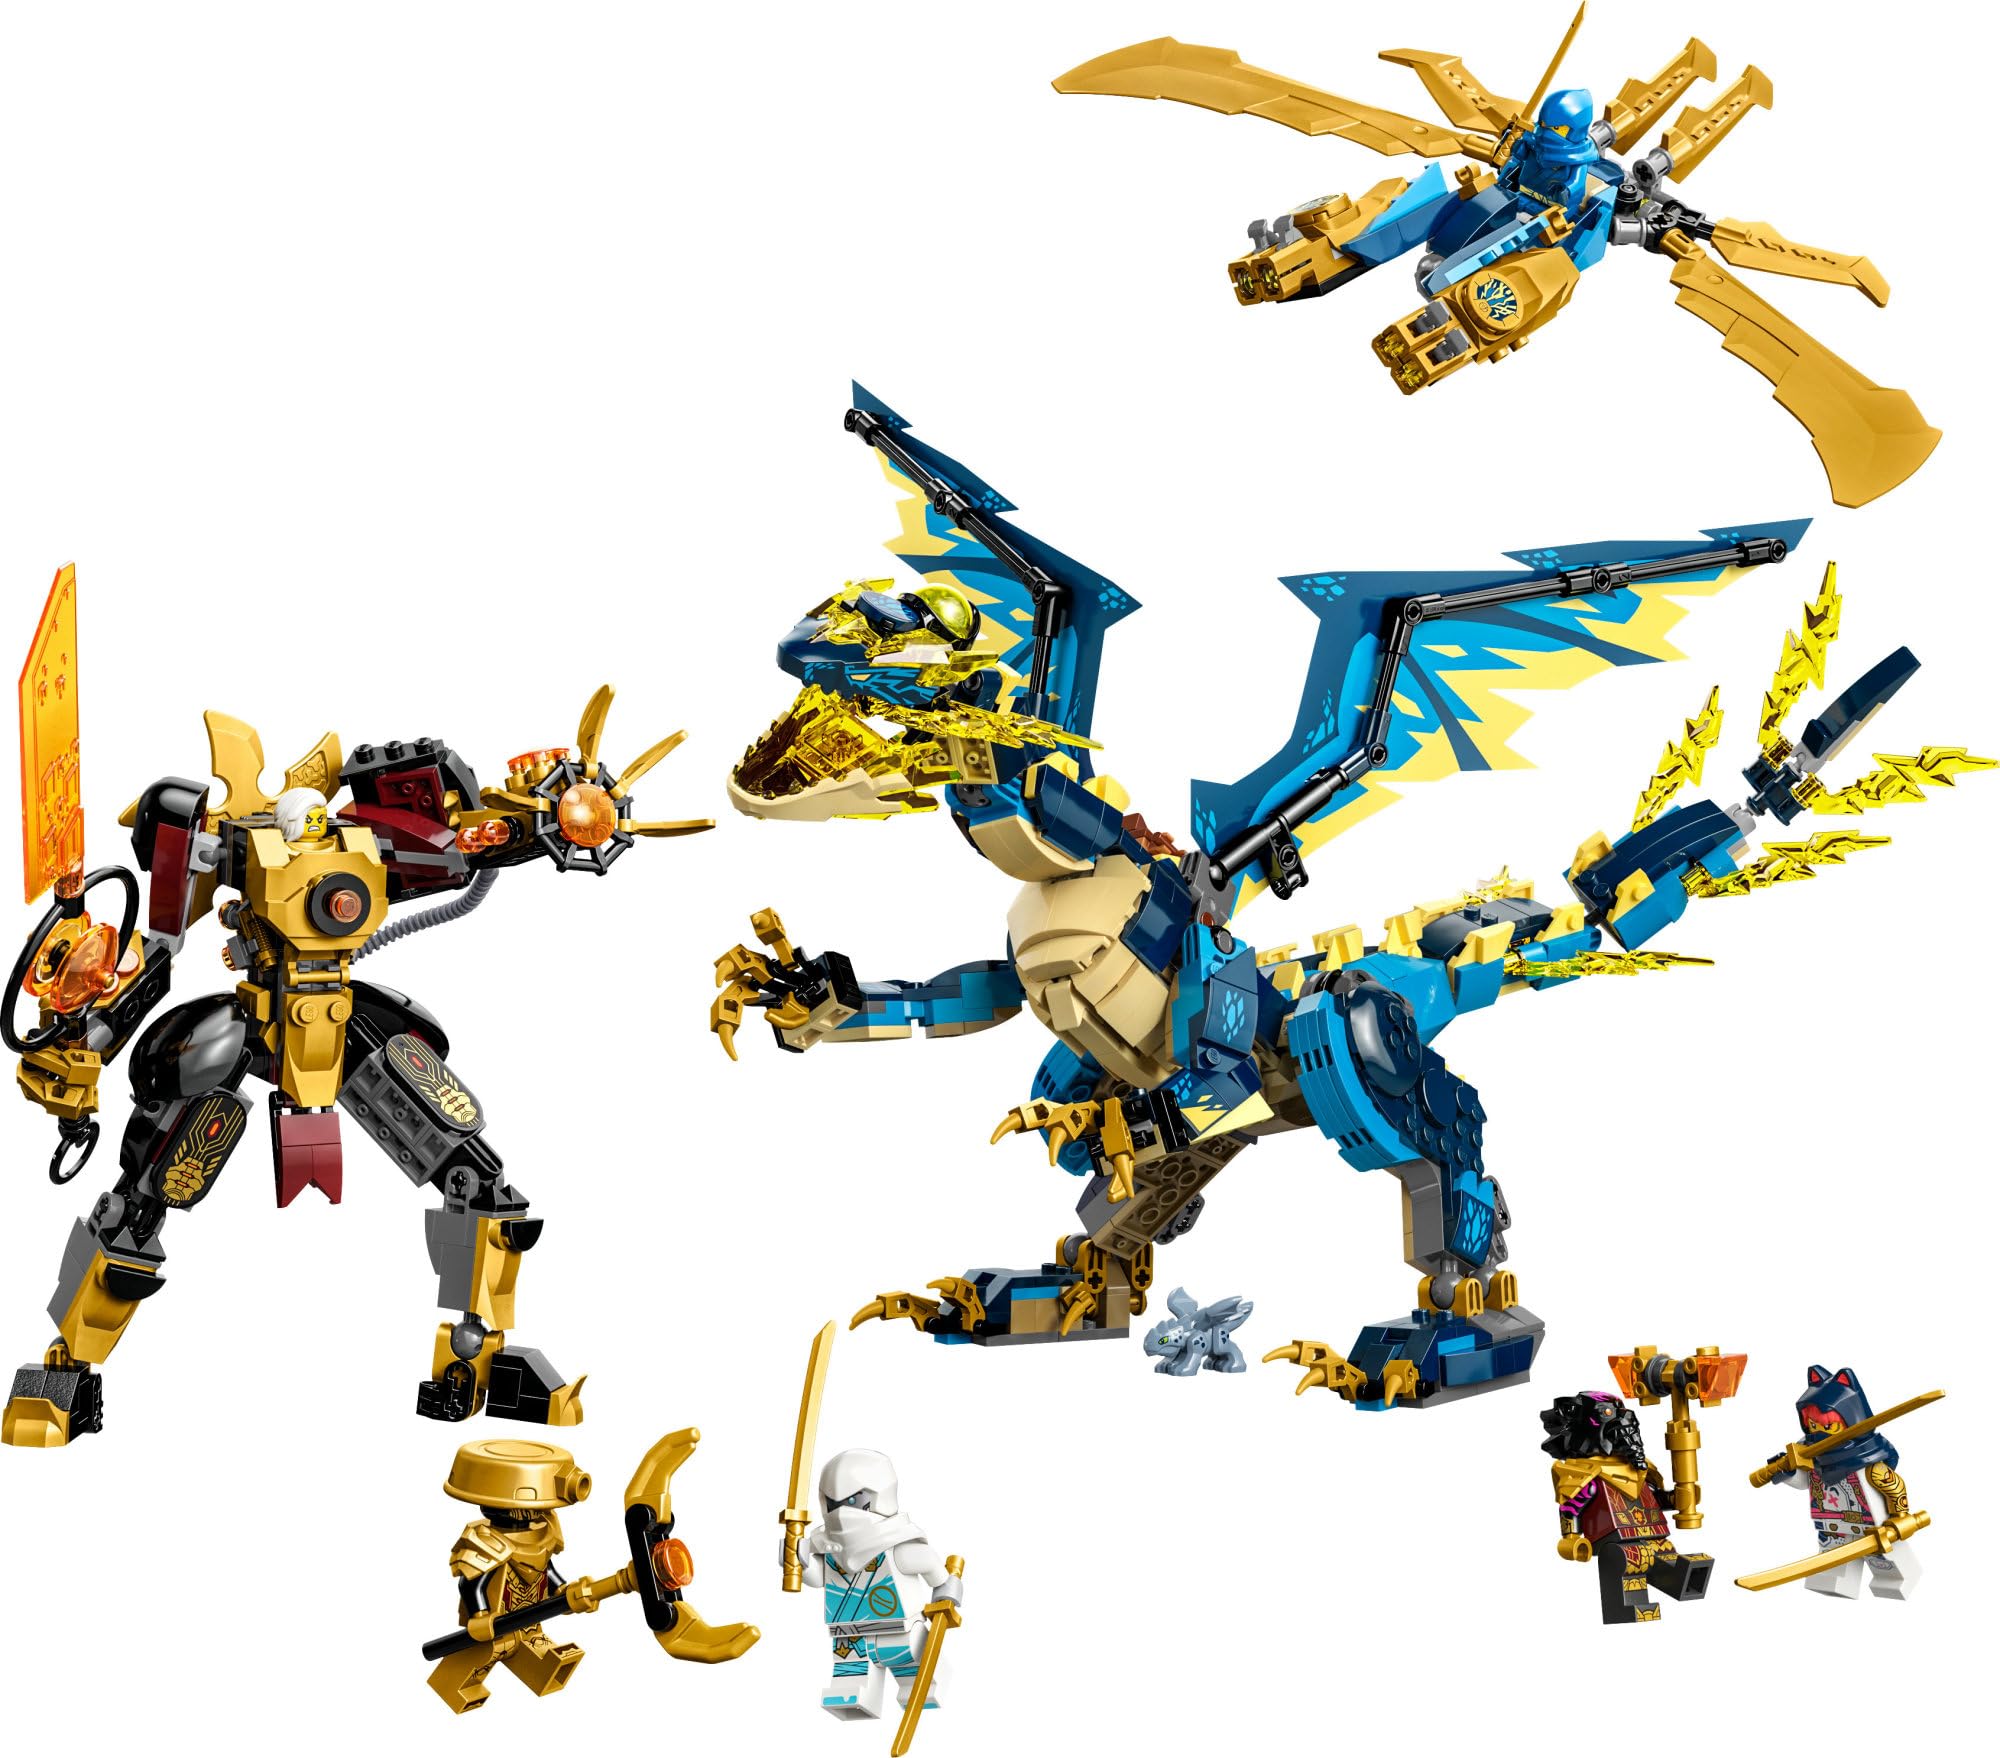 LEGO NINJAGO Elemental Dragon vs. The Empress Mech 71796 Building Toy Set, Features a Dragon, Mech, Ninja Flyer and 6 Minifigures, Gift for Boys and Girls Ages 9+ Who Love Ninja Warriors